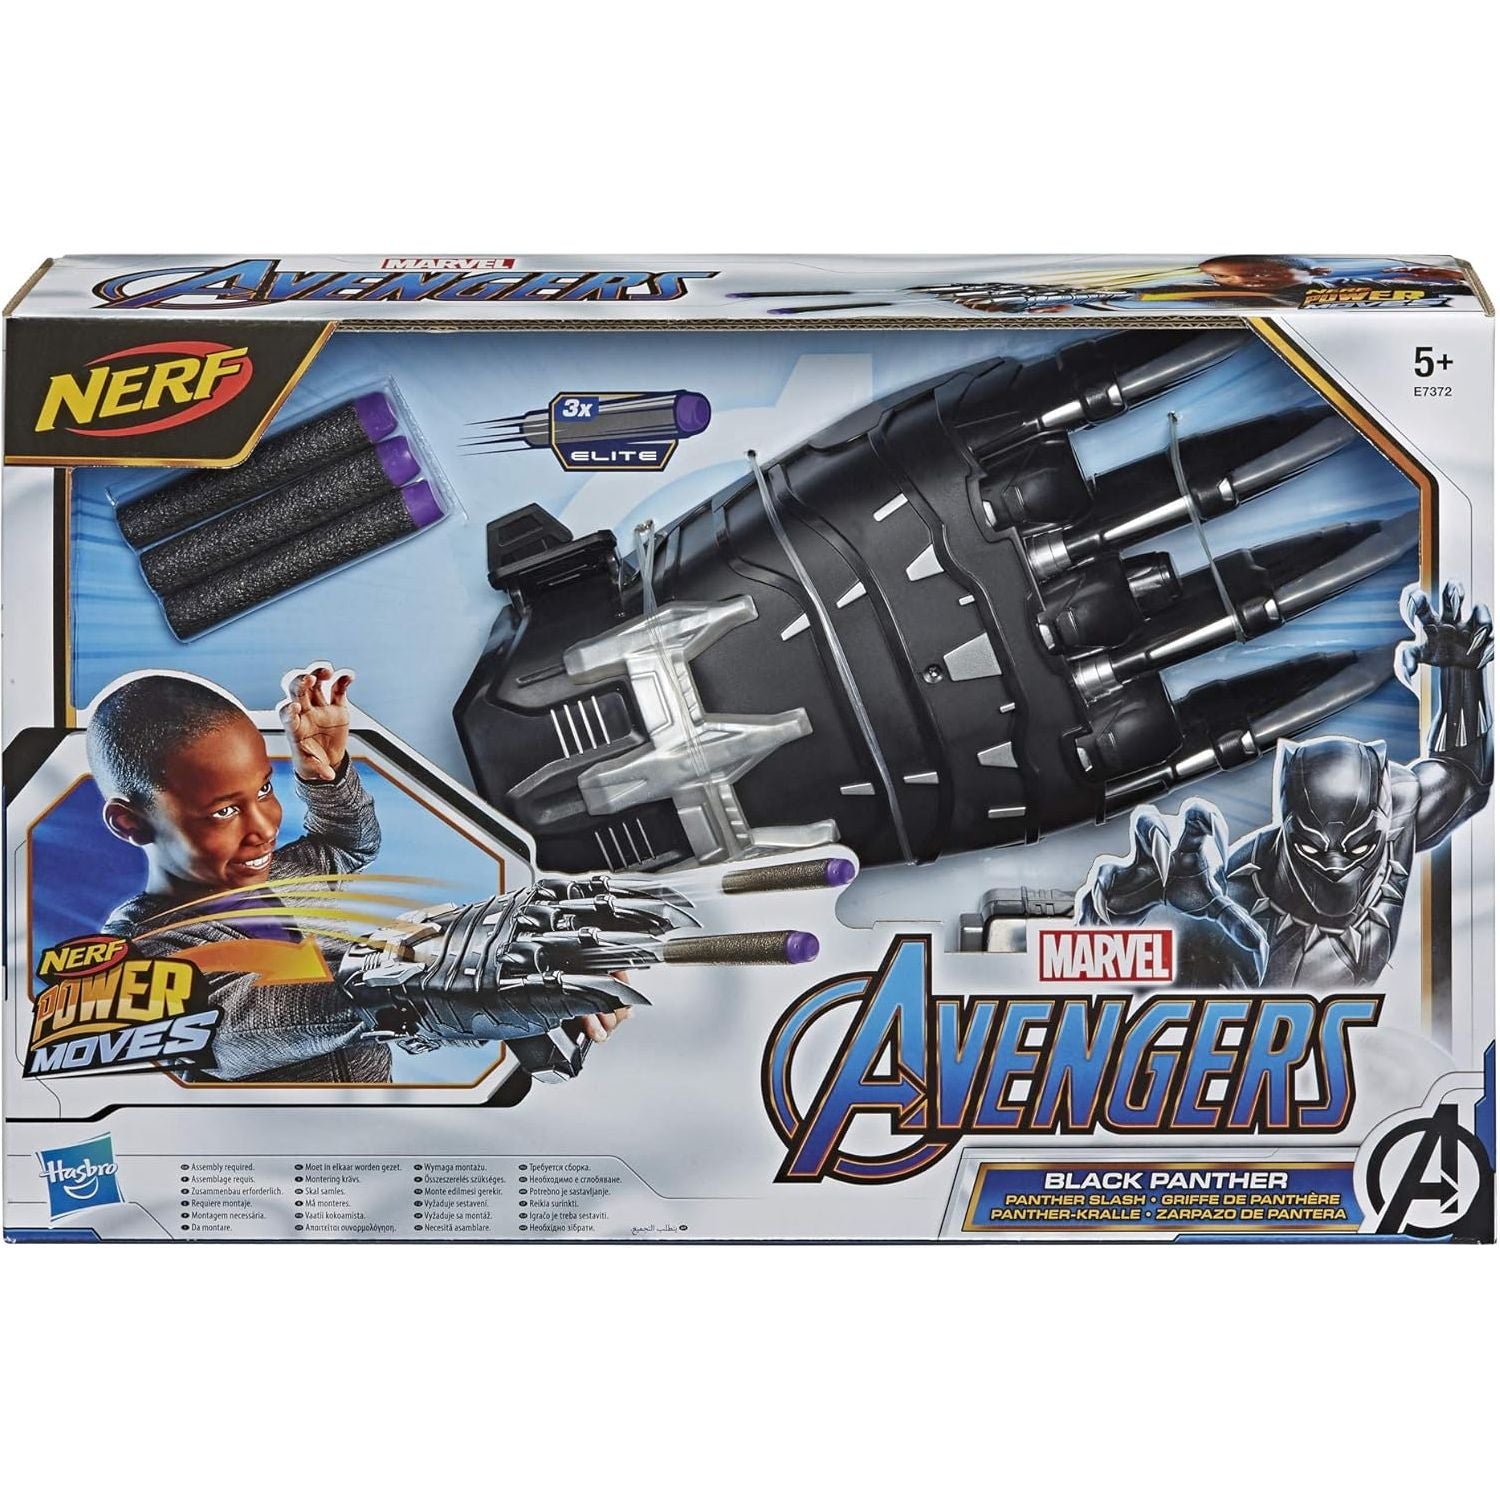 Hasbro NERF Power Moves Marvel Avengers Black Panther Power Slash Claw Dart-Launching Toy for Kids Roleplay